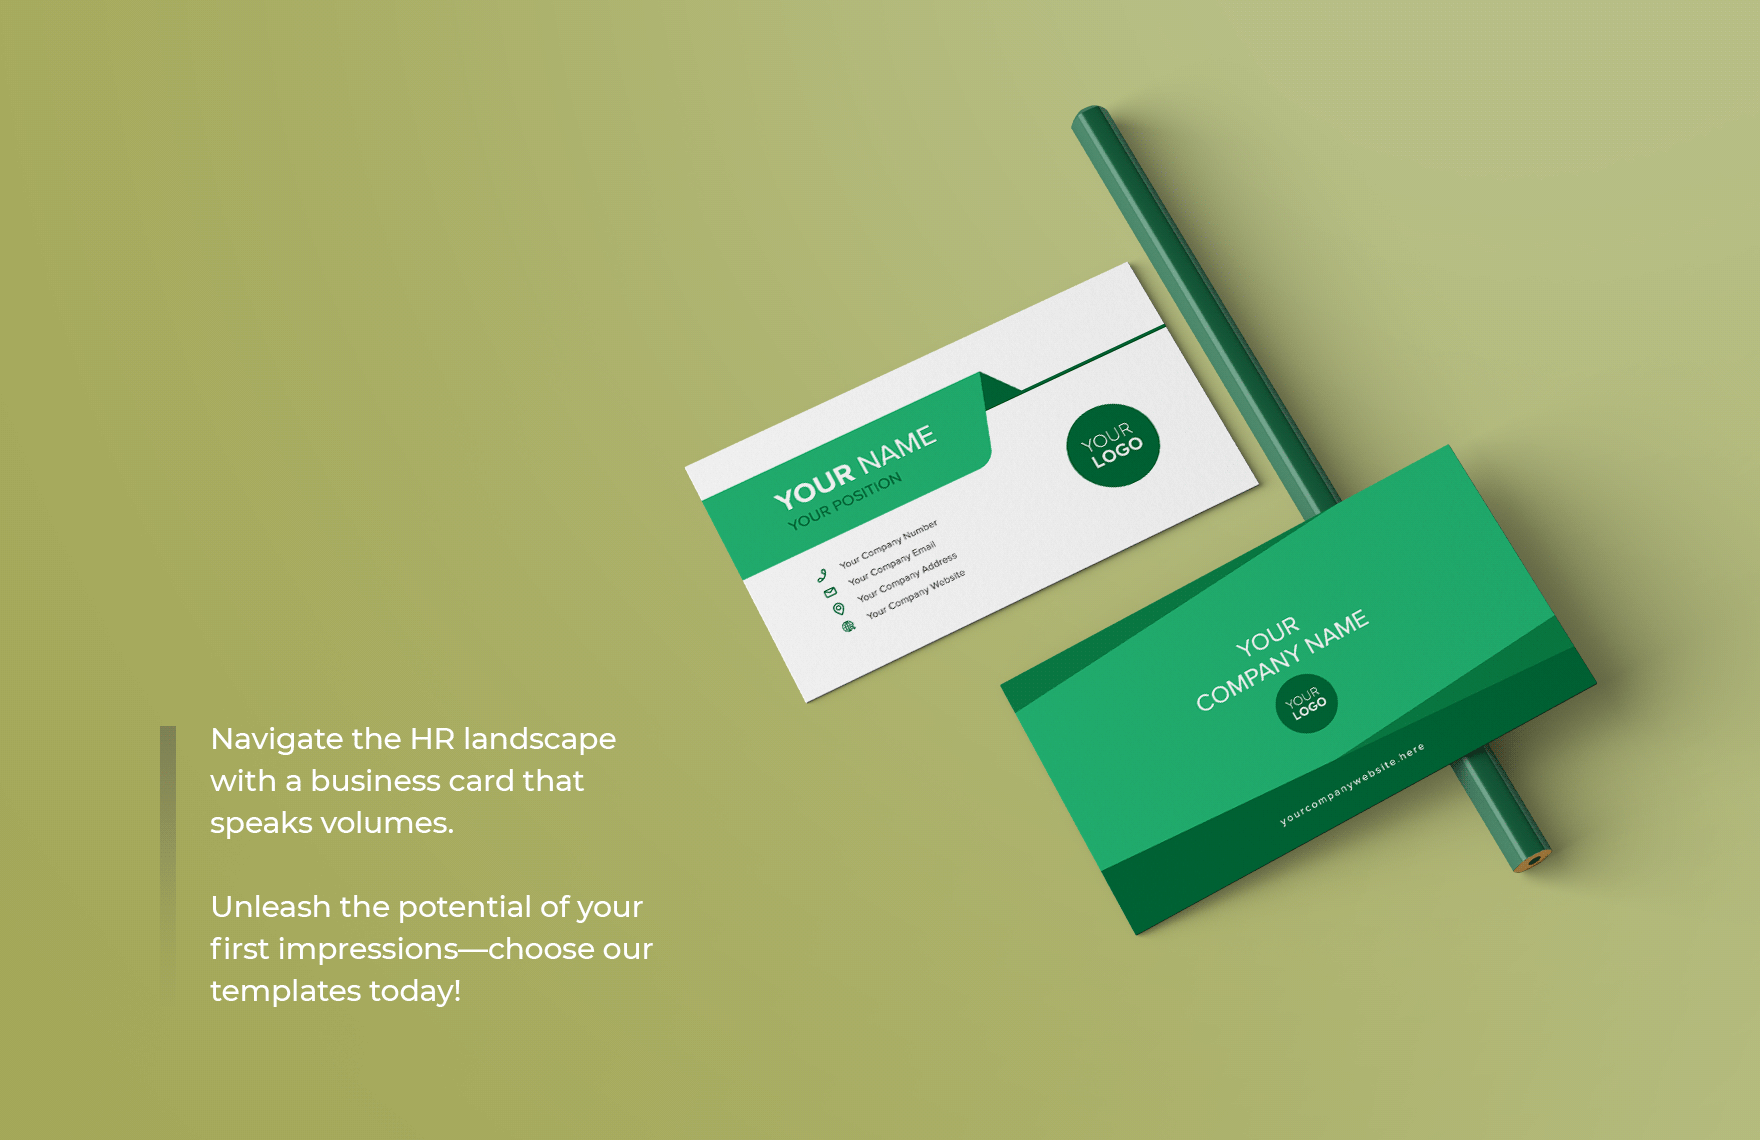 Brand Manager Business Card Template